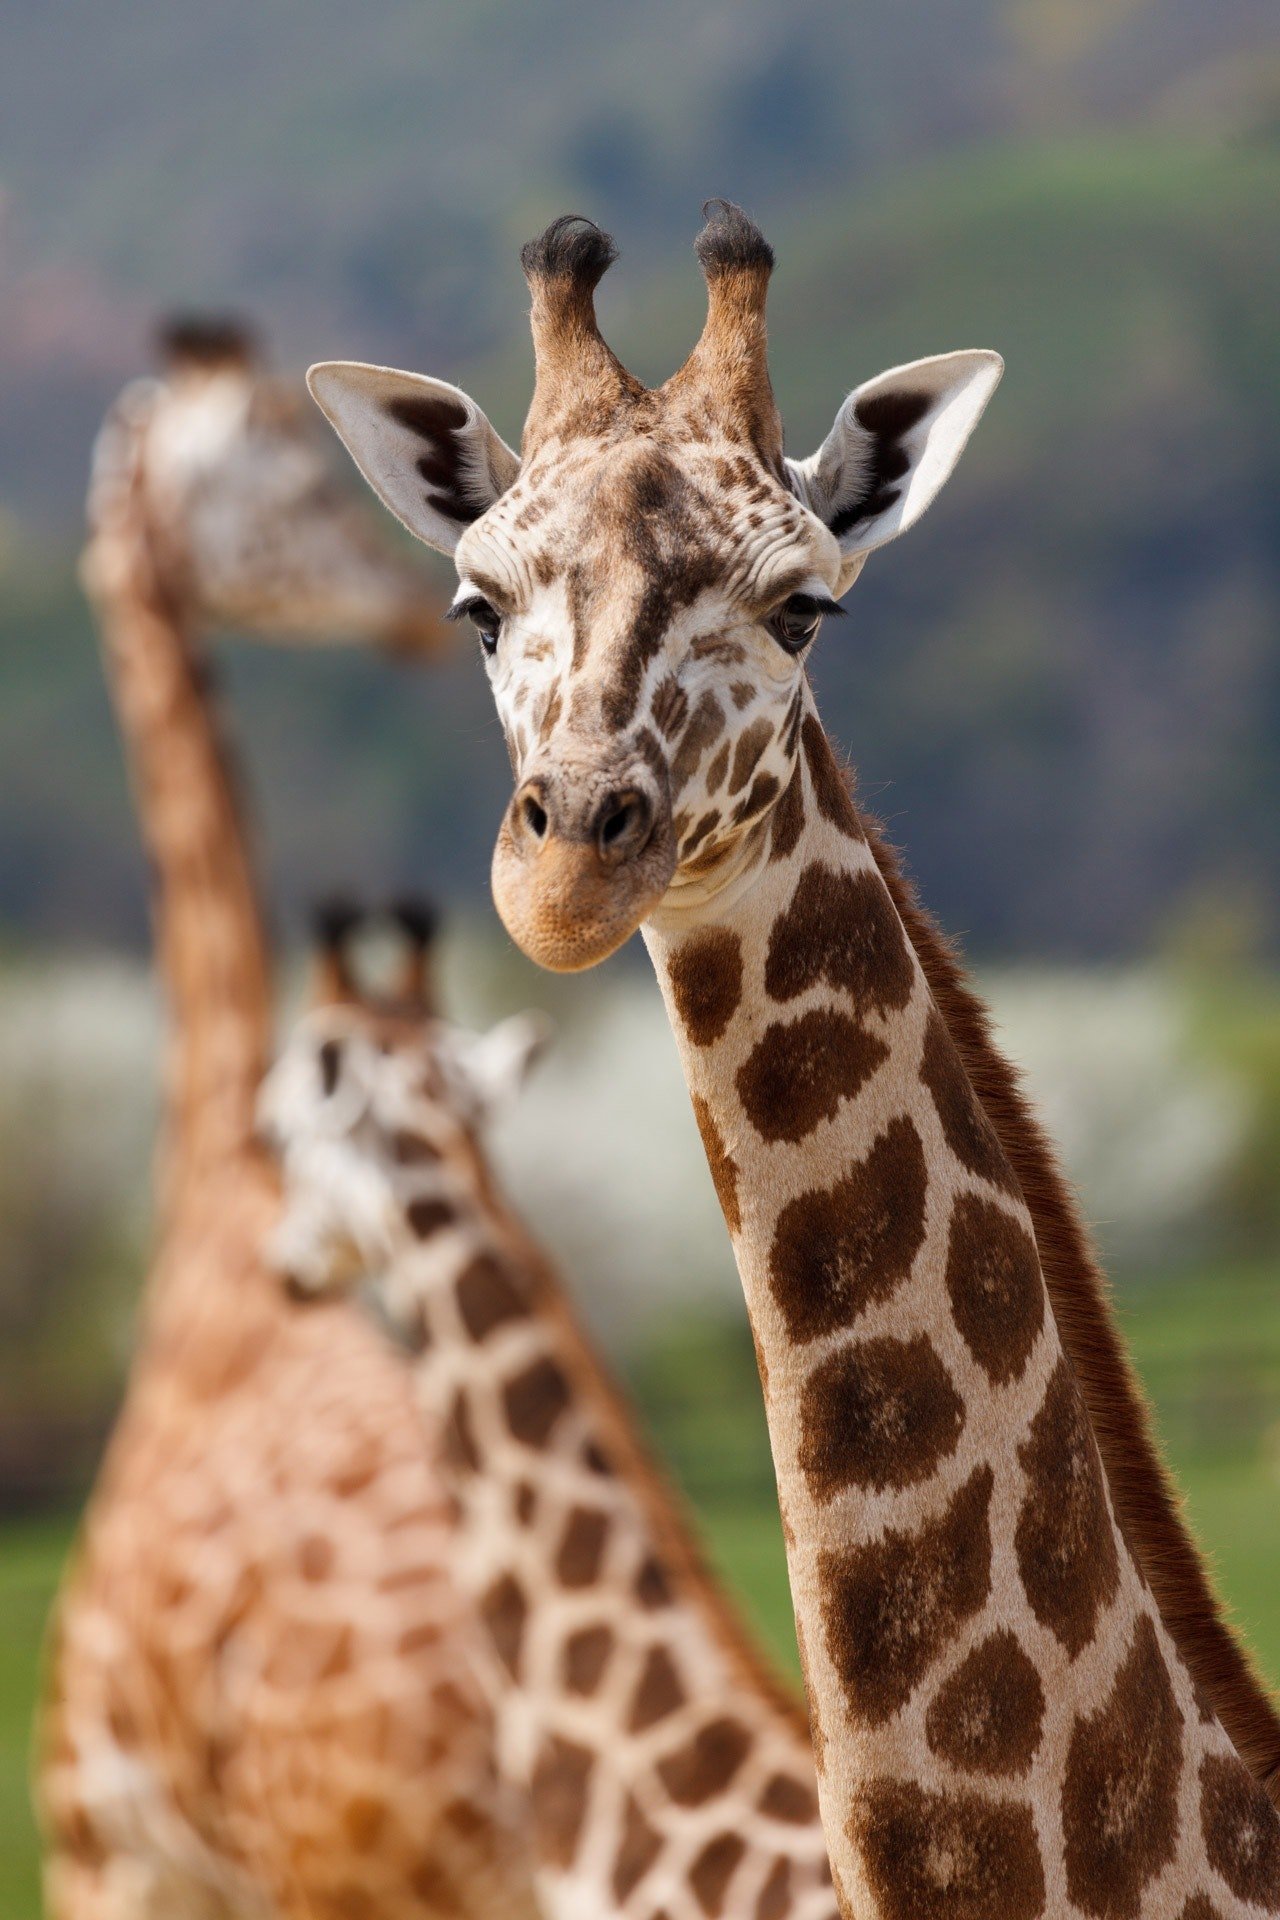 A picture of a giraffe. | Source: Pexels